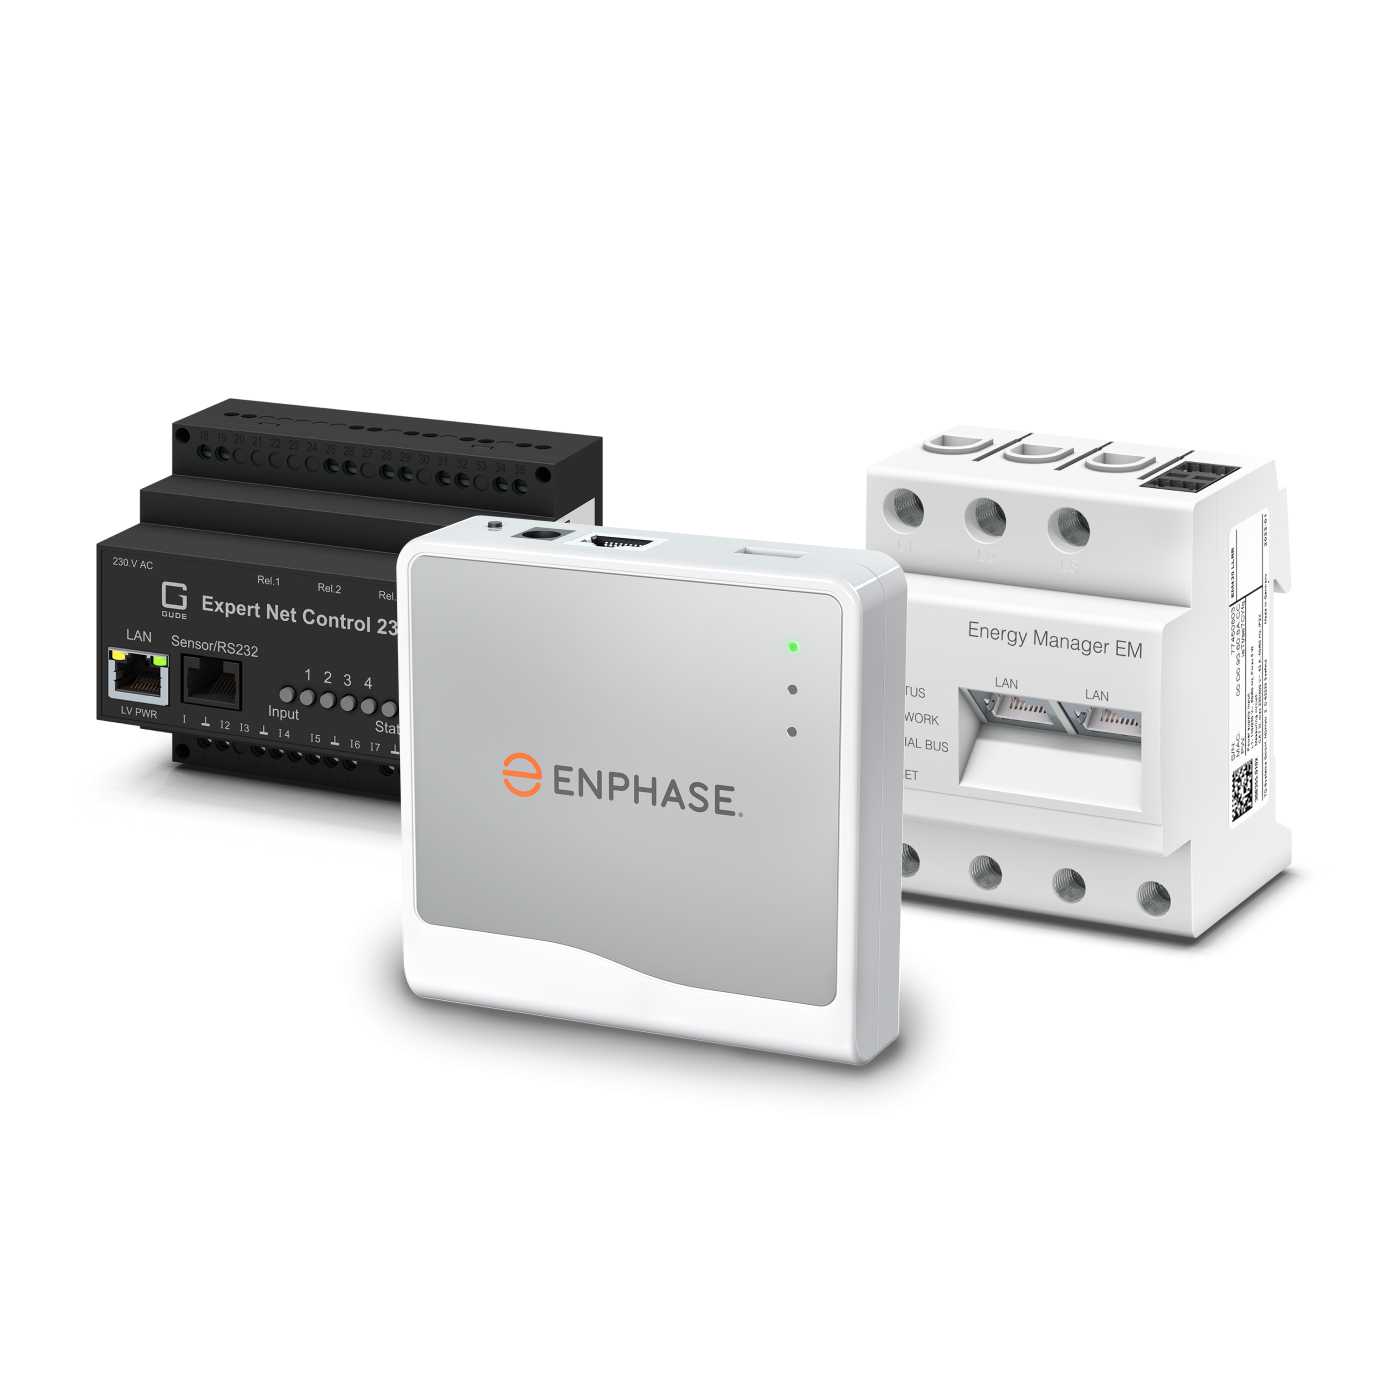 Enphase Home Energy Management Router